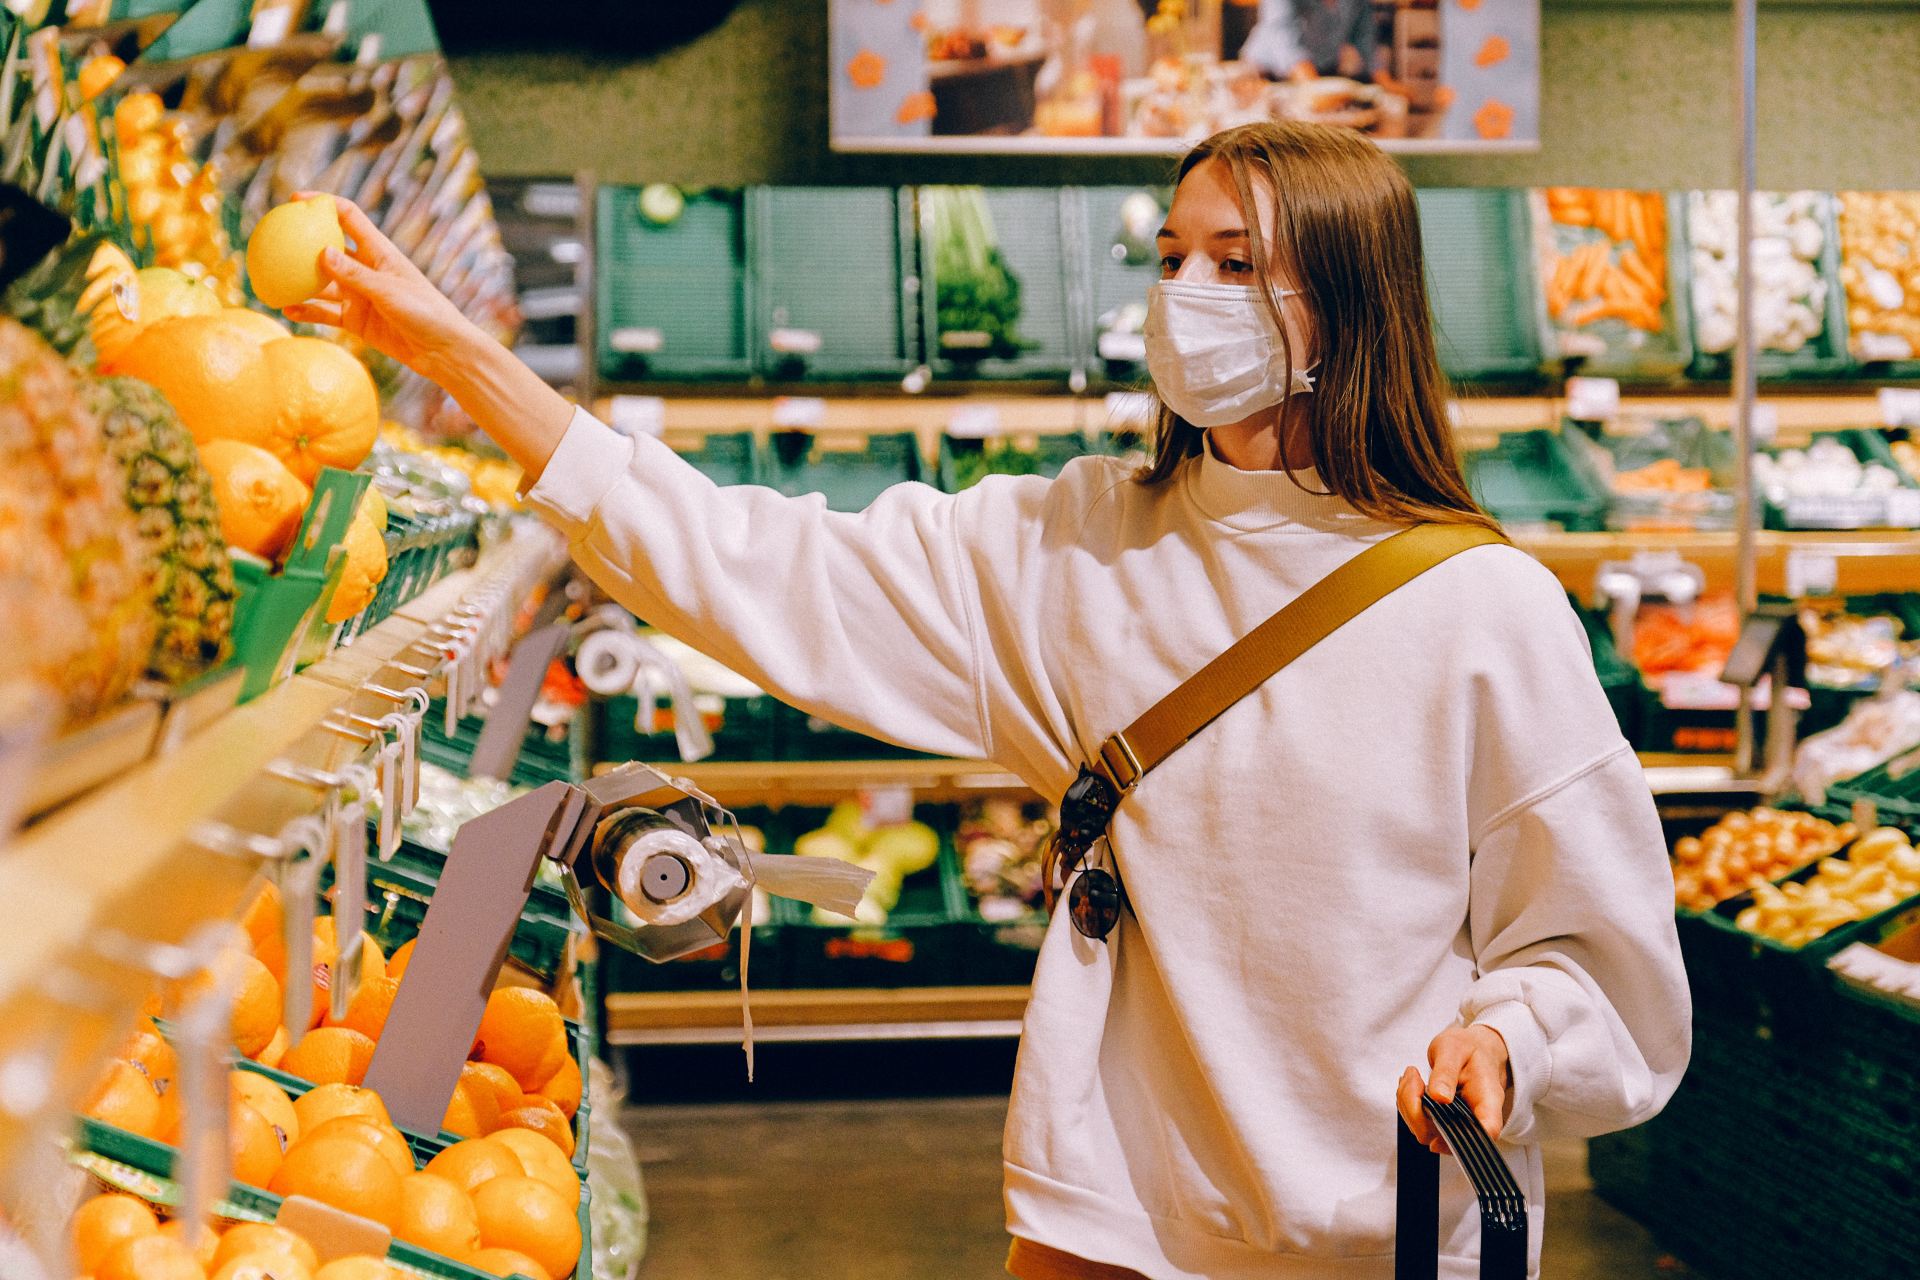 Woman wearing a mask in the supermarket buying fruit